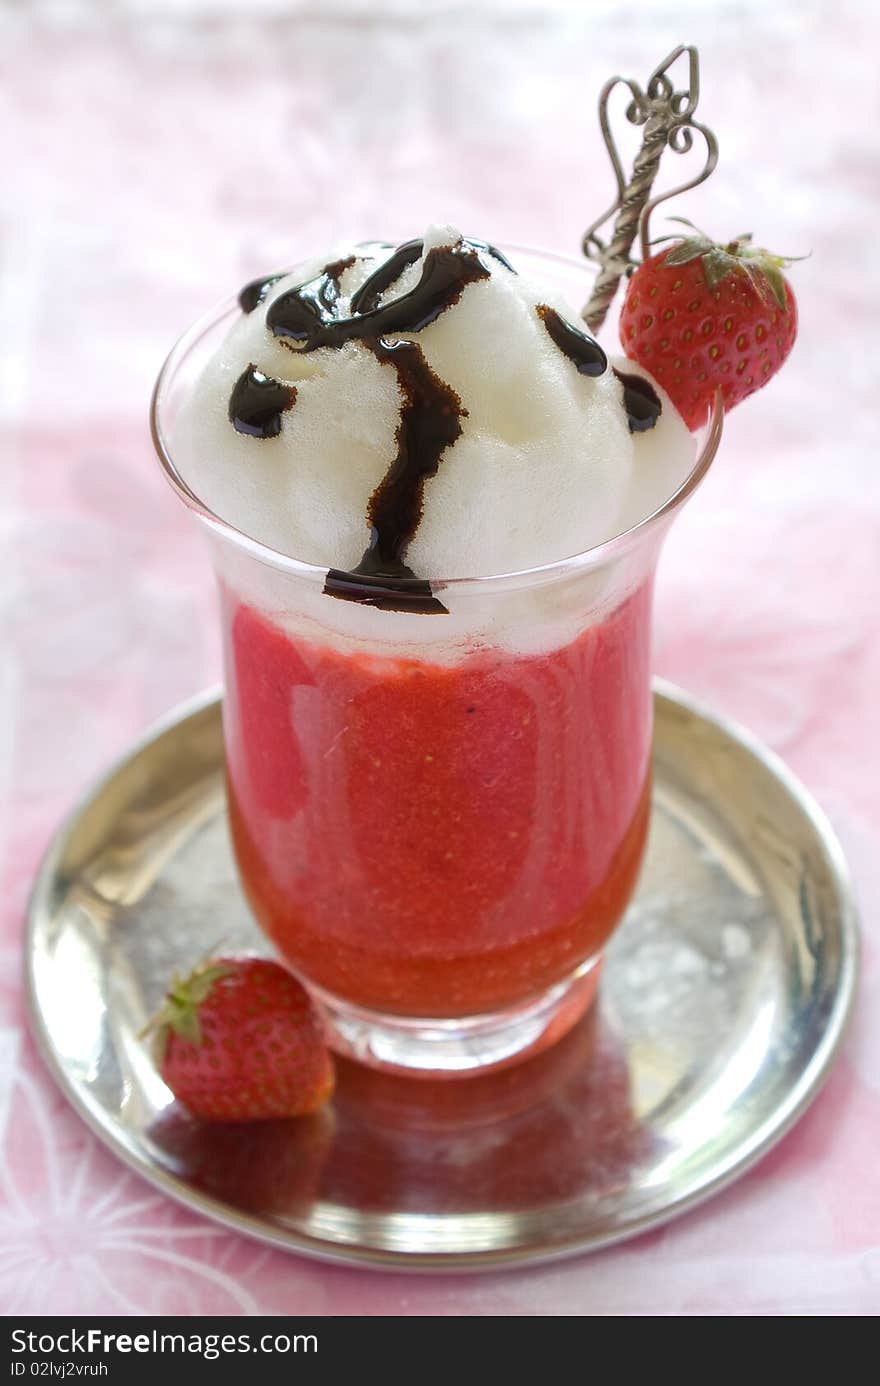 Strawberry dessert decorated with fresh strawberry and syrup